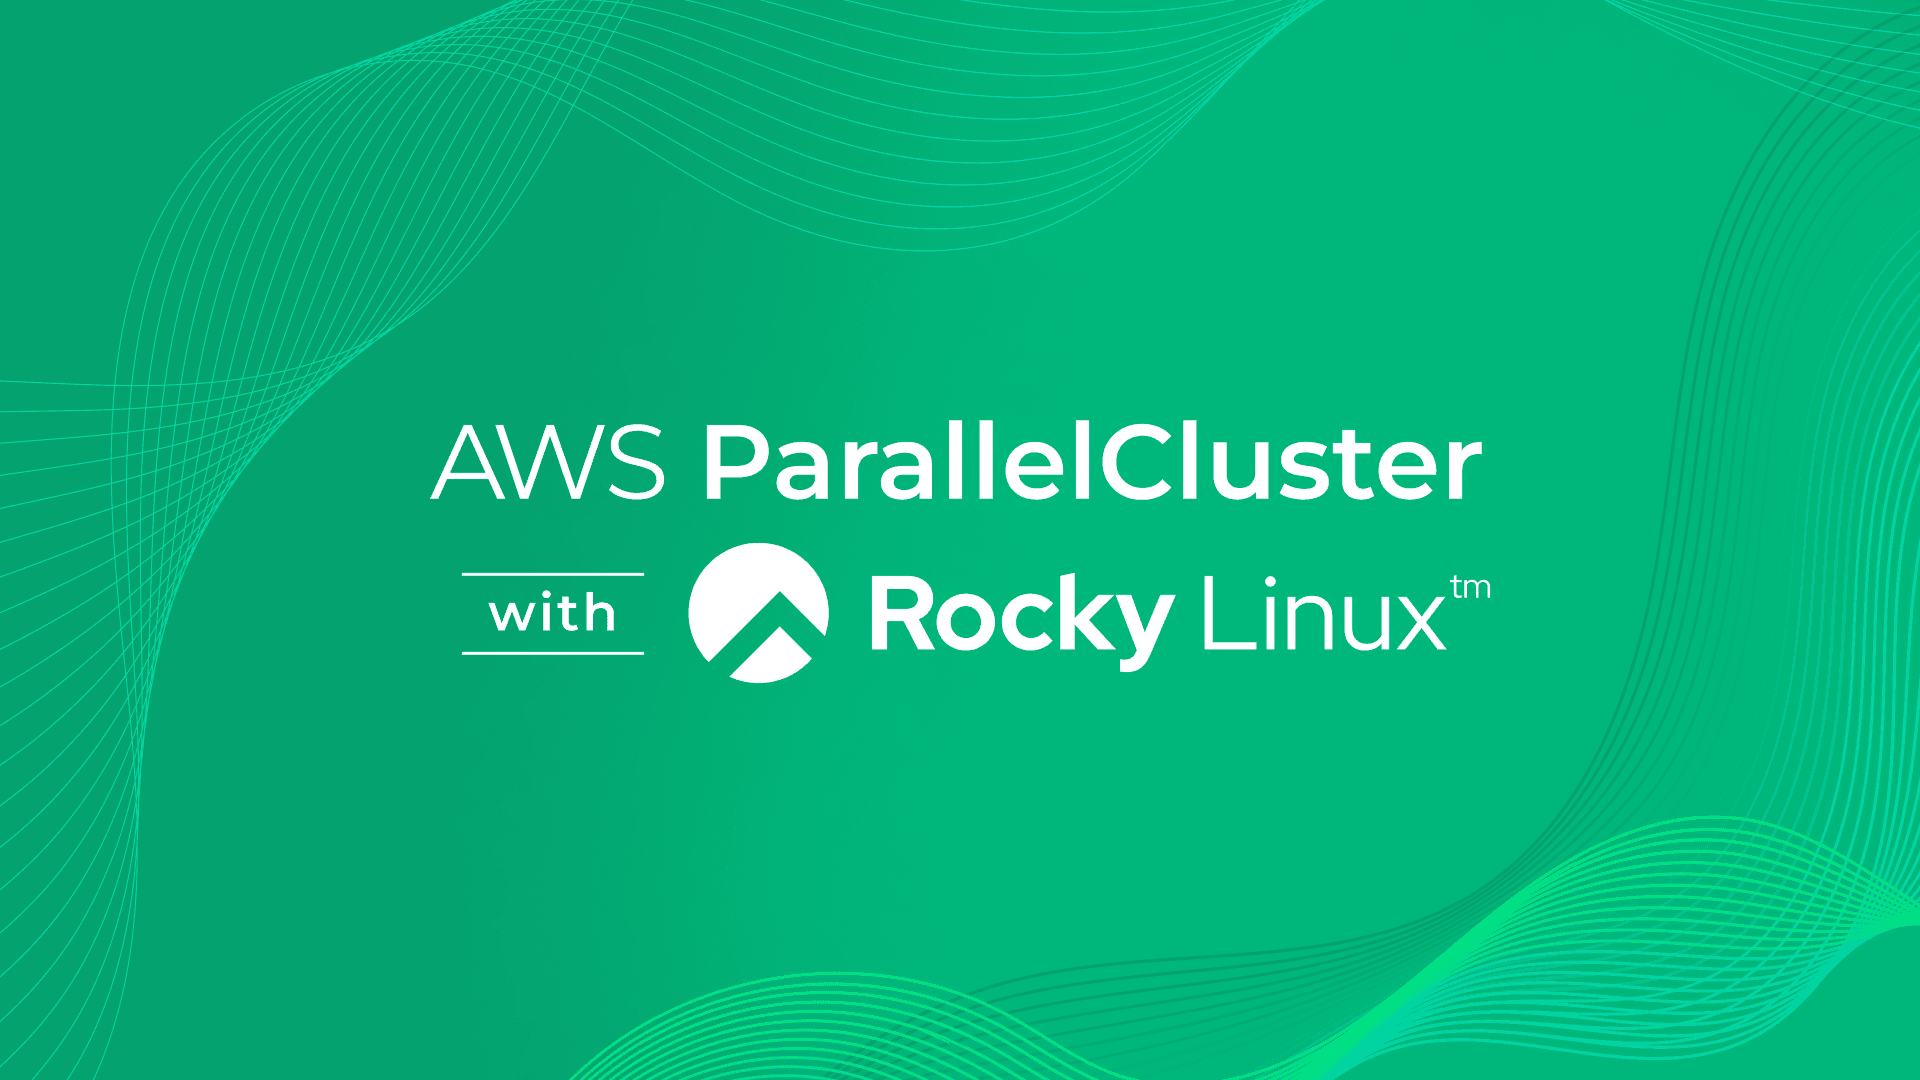 How to Use AWS ParallelCluster 3.8.0 with Rocky Linux 8